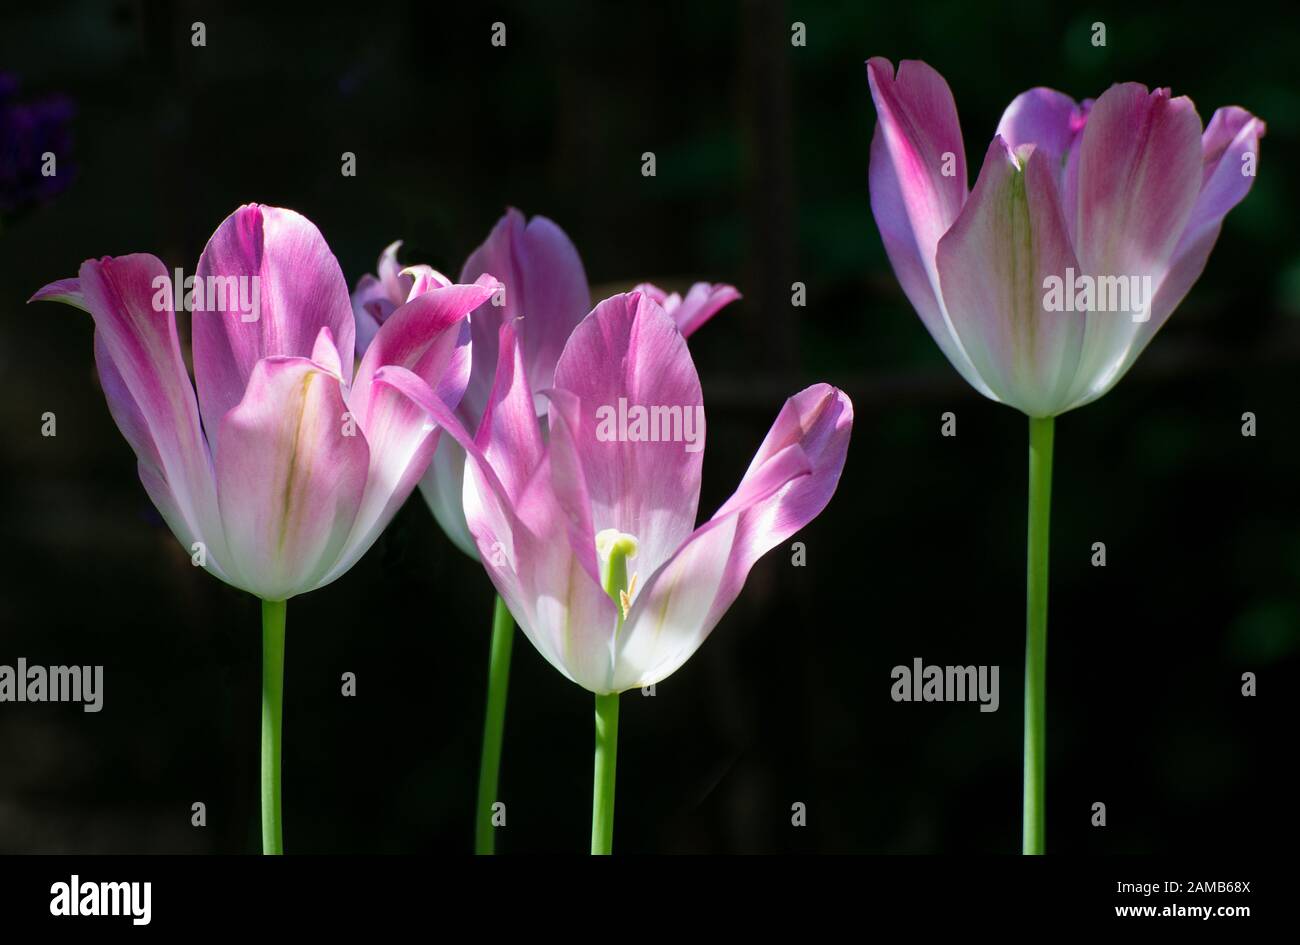 Four pink tinged tulips in full sun with petals highlighted against black background Stock Photo